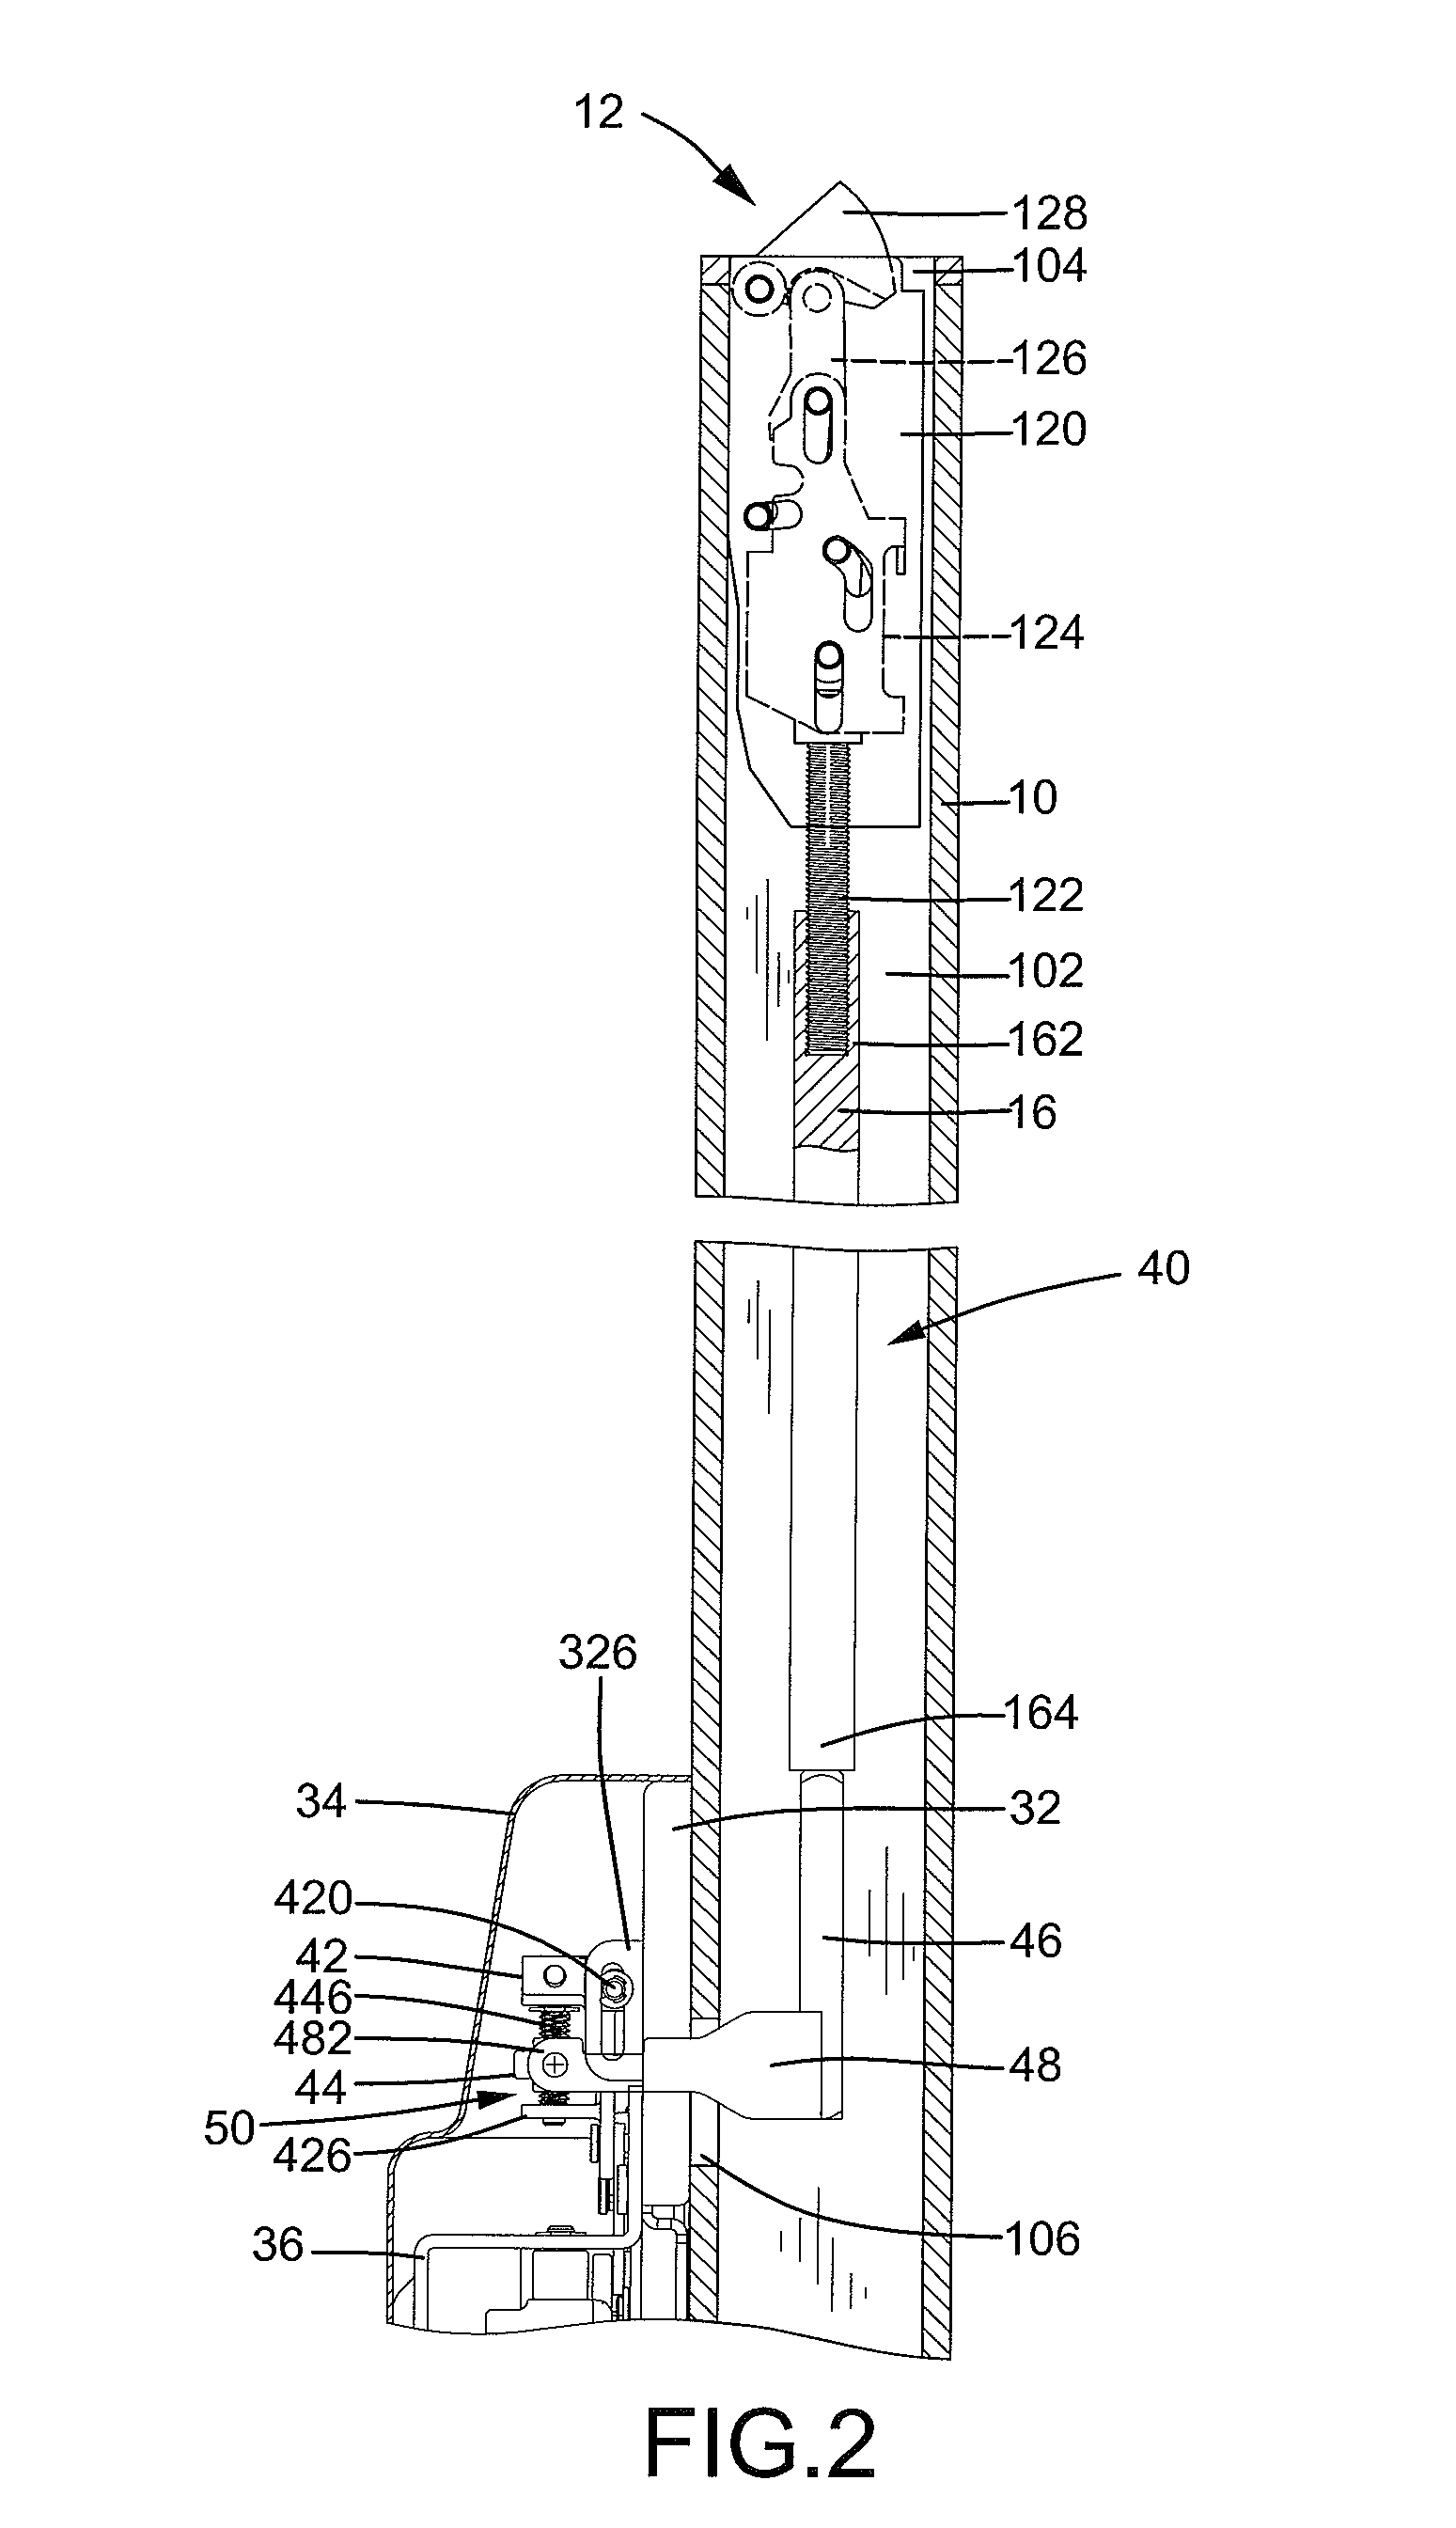 Connecting Device for Concealed-Type Top or Bottom Latch for Panic Exit Door Lock